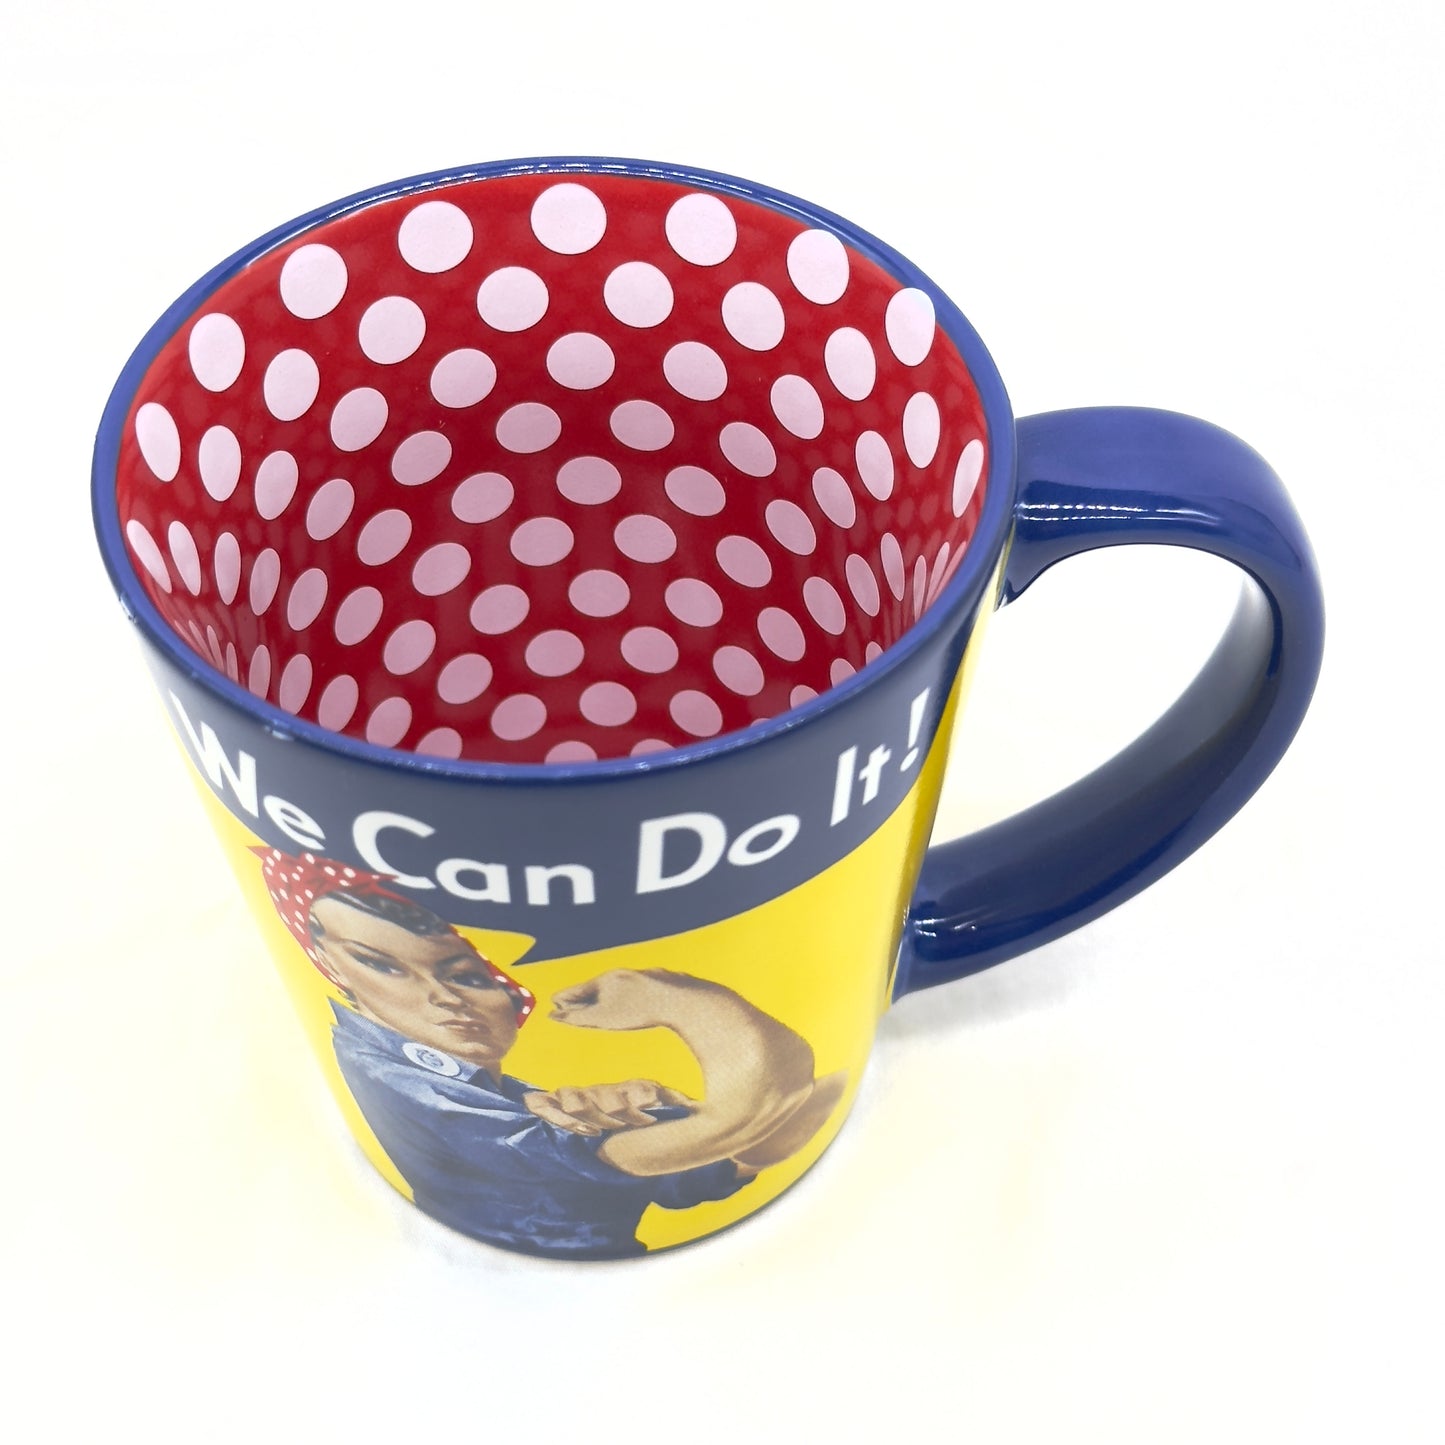 Rosie the Riveter We Can Do it! Coffee Mug with Polka Dots